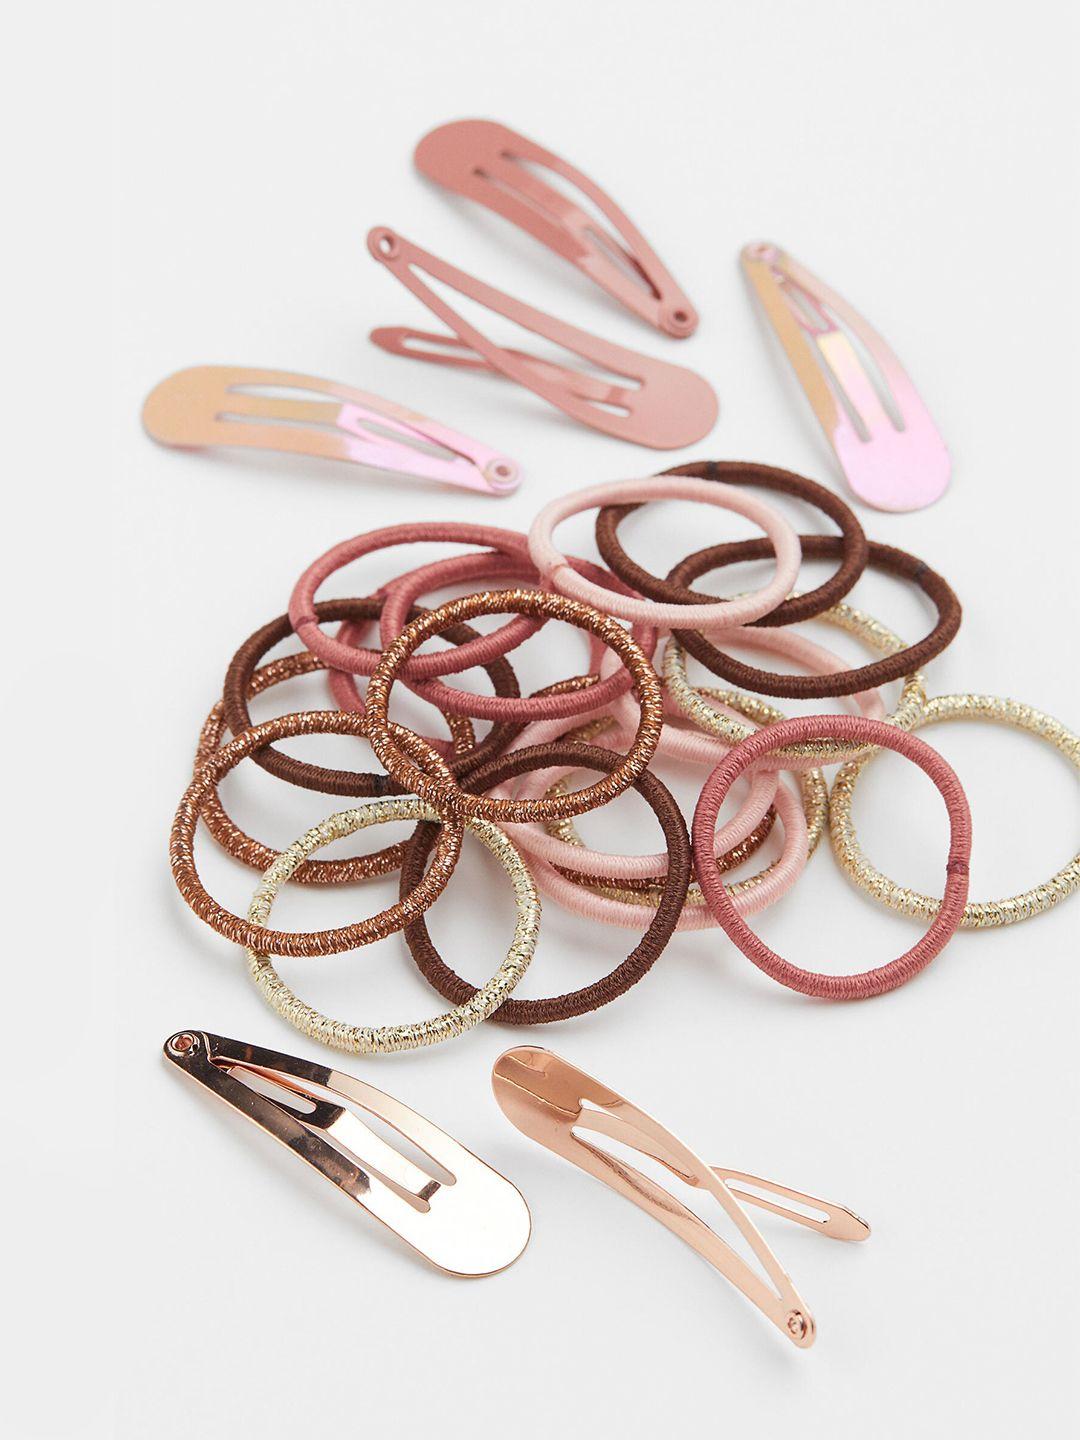 h&m girls 26 pieces hair elastics and clips